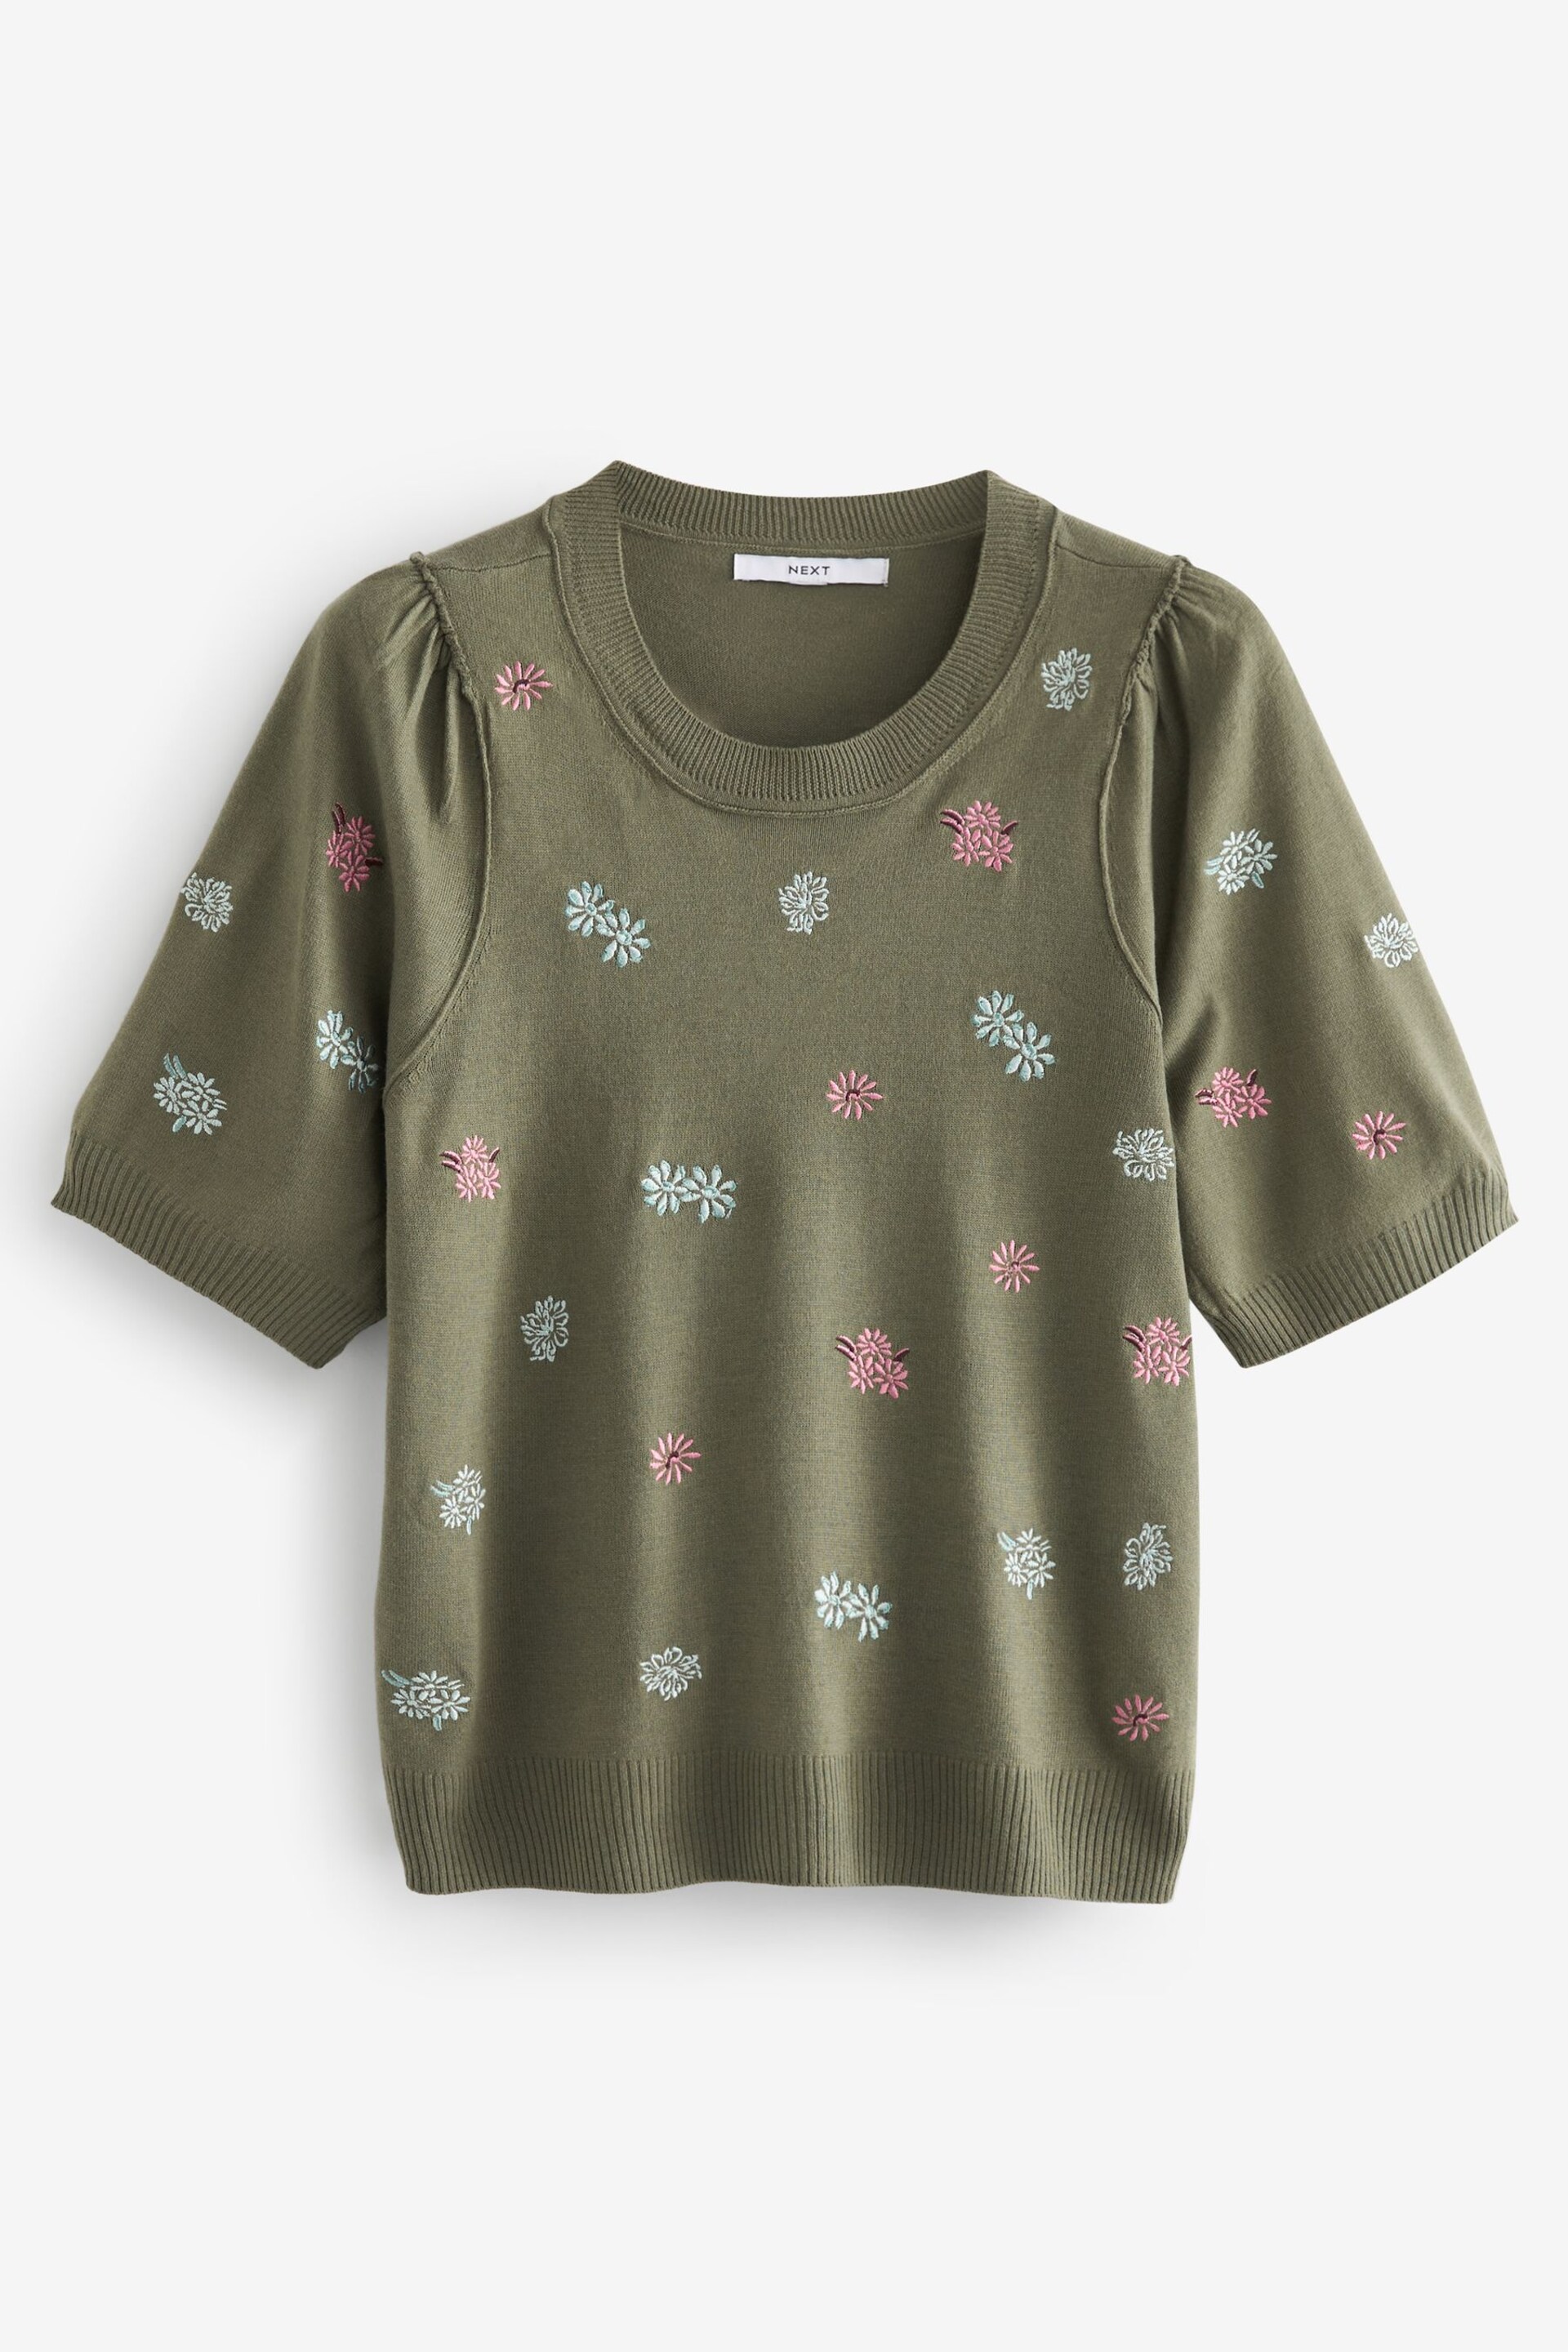 Khaki Green Floral Embroidery Crew Neck Short Sleeve Knitted Top - Image 4 of 5